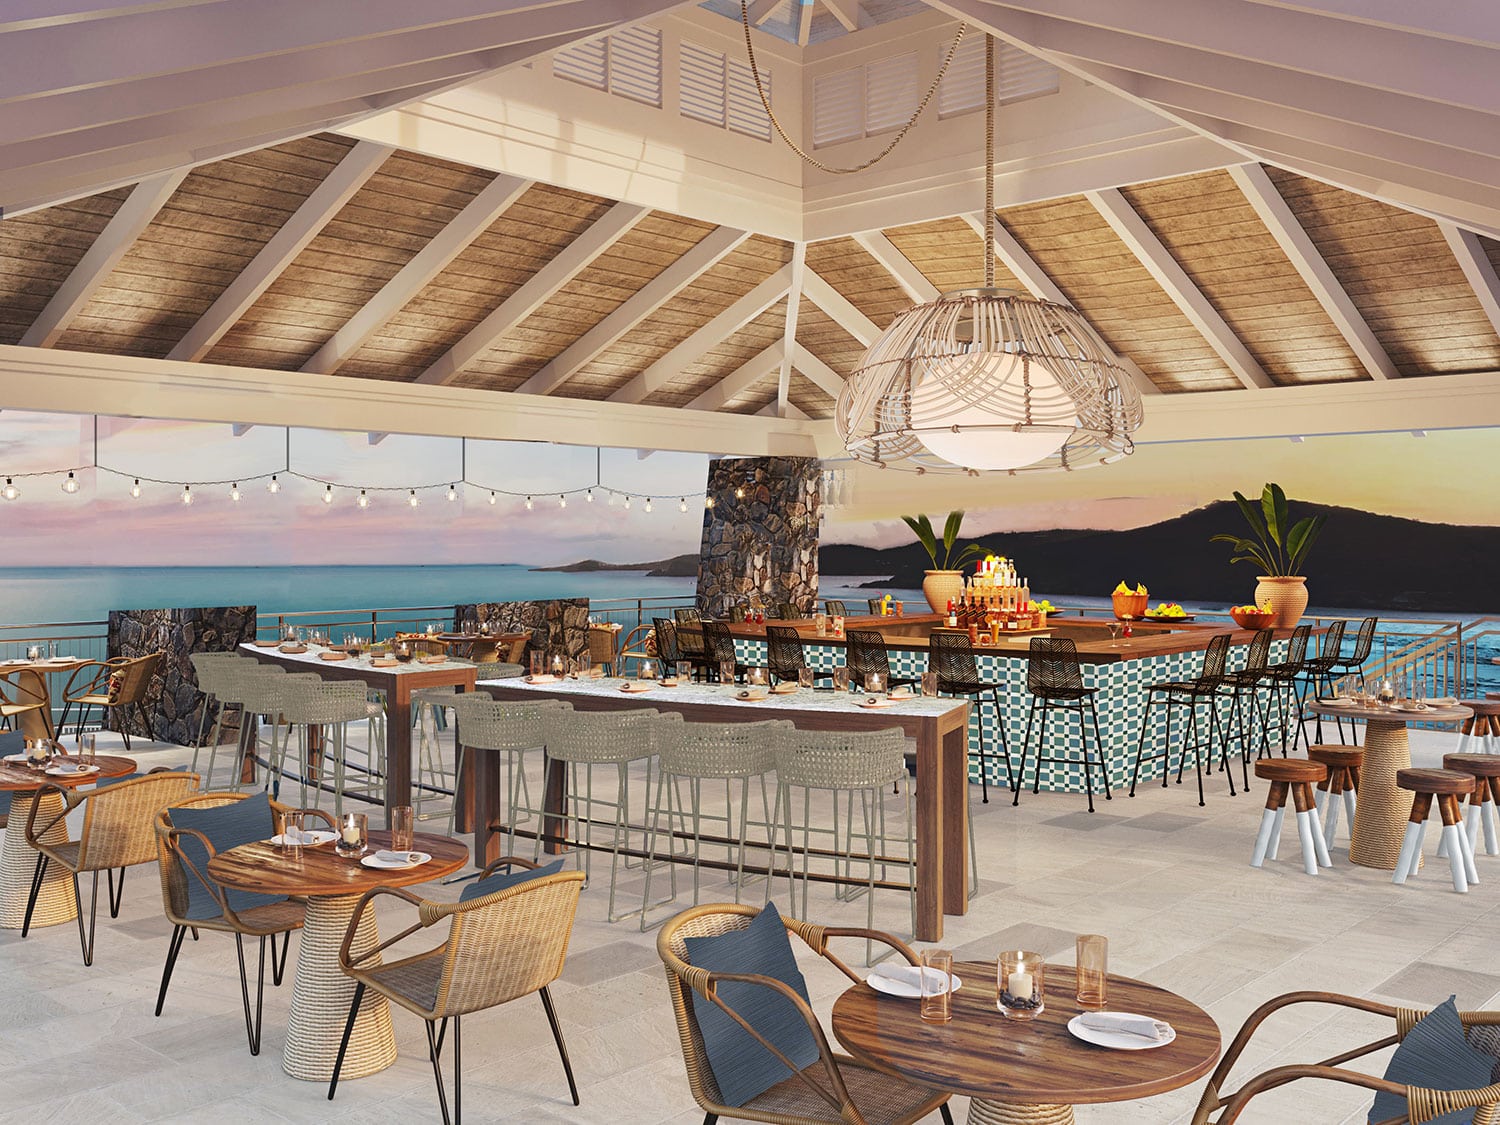 A rendering of the Luna Mar restaurant at Frenchman's Reef in St. Thomas, U.S. Virgin Islands.